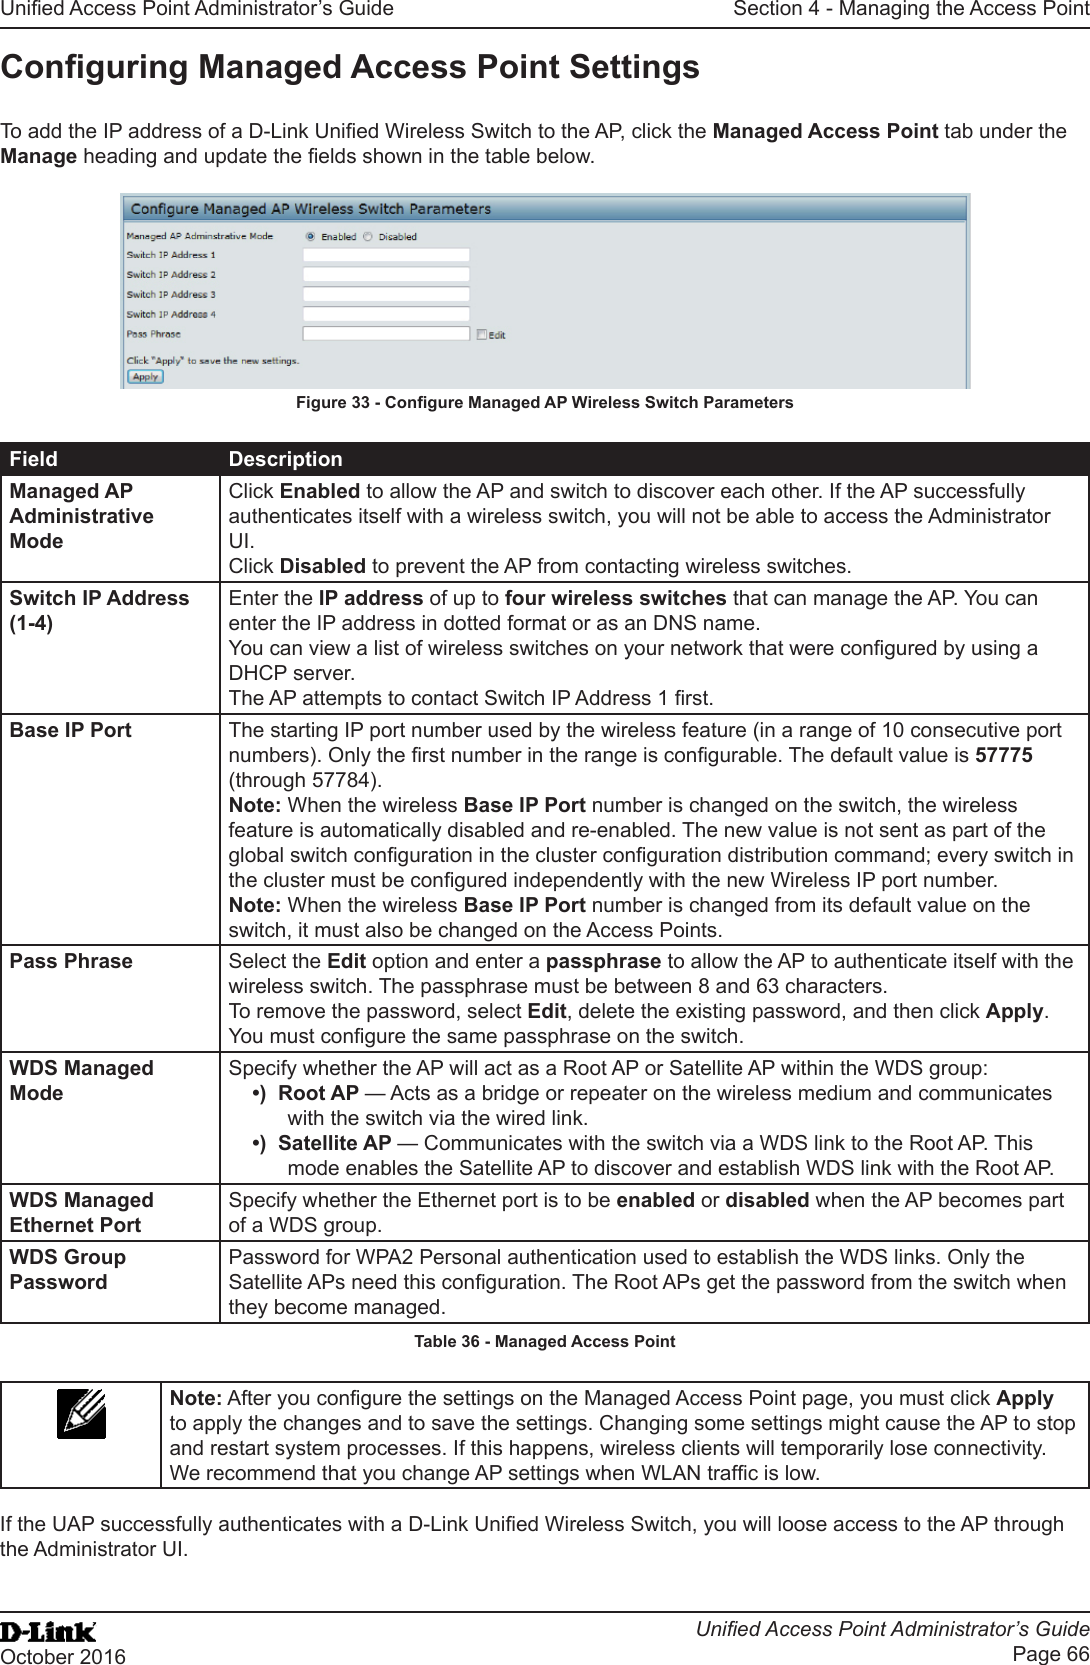 Unied Access Point Administrator’s GuideUnied Access Point Administrator’s GuidePage 66October 2016Section 4 - Managing the Access PointConguring Managed Access Point SettingsTo add the IP address of a D-Link Unied Wireless Switch to the AP, click the Managed Access Point tab under the Manage heading and update the elds shown in the table below.Figure 33 - Congure Managed AP Wireless Switch ParametersField DescriptionManaged AP Administrative ModeClick Enabled to allow the AP and switch to discover each other. If the AP successfully authenticates itself with a wireless switch, you will not be able to access the Administrator UI. Click Disabled to prevent the AP from contacting wireless switches.Switch IP Address (1-4)Enter the IP address of up to four wireless switches that can manage the AP. You can enter the IP address in dotted format or as an DNS name.You can view a list of wireless switches on your network that were congured by using a DHCP server.The AP attempts to contact Switch IP Address 1 rst.Base IP Port The starting IP port number used by the wireless feature (in a range of 10 consecutive port numbers). Only the rst number in the range is congurable. The default value is 57775 (through 57784).Note: When the wireless Base IP Port number is changed on the switch, the wireless feature is automatically disabled and re-enabled. The new value is not sent as part of the global switch conguration in the cluster conguration distribution command; every switch in the cluster must be congured independently with the new Wireless IP port number.Note: When the wireless Base IP Port number is changed from its default value on the switch, it must also be changed on the Access Points.Pass Phrase Select the Edit option and enter a passphrase to allow the AP to authenticate itself with the wireless switch. The passphrase must be between 8 and 63 characters. To remove the password, select Edit, delete the existing password, and then click Apply.You must congure the same passphrase on the switch.WDS Managed ModeSpecify whether the AP will act as a Root AP or Satellite AP within the WDS group:•)  Root AP — Acts as a bridge or repeater on the wireless medium and communicates with the switch via the wired link.•)  Satellite AP — Communicates with the switch via a WDS link to the Root AP. This mode enables the Satellite AP to discover and establish WDS link with the Root AP.WDS Managed Ethernet PortSpecify whether the Ethernet port is to be enabled or disabled when the AP becomes part of a WDS group.WDS Group PasswordPassword for WPA2 Personal authentication used to establish the WDS links. Only the Satellite APs need this conguration. The Root APs get the password from the switch when they become managed.Table 36 - Managed Access PointNote: After you congure the settings on the Managed Access Point page, you must click Apply to apply the changes and to save the settings. Changing some settings might cause the AP to stop and restart system processes. If this happens, wireless clients will temporarily lose connectivity. We recommend that you change AP settings when WLAN trafc is low. If the UAP successfully authenticates with a D-Link Unied Wireless Switch, you will loose access to the AP through the Administrator UI.